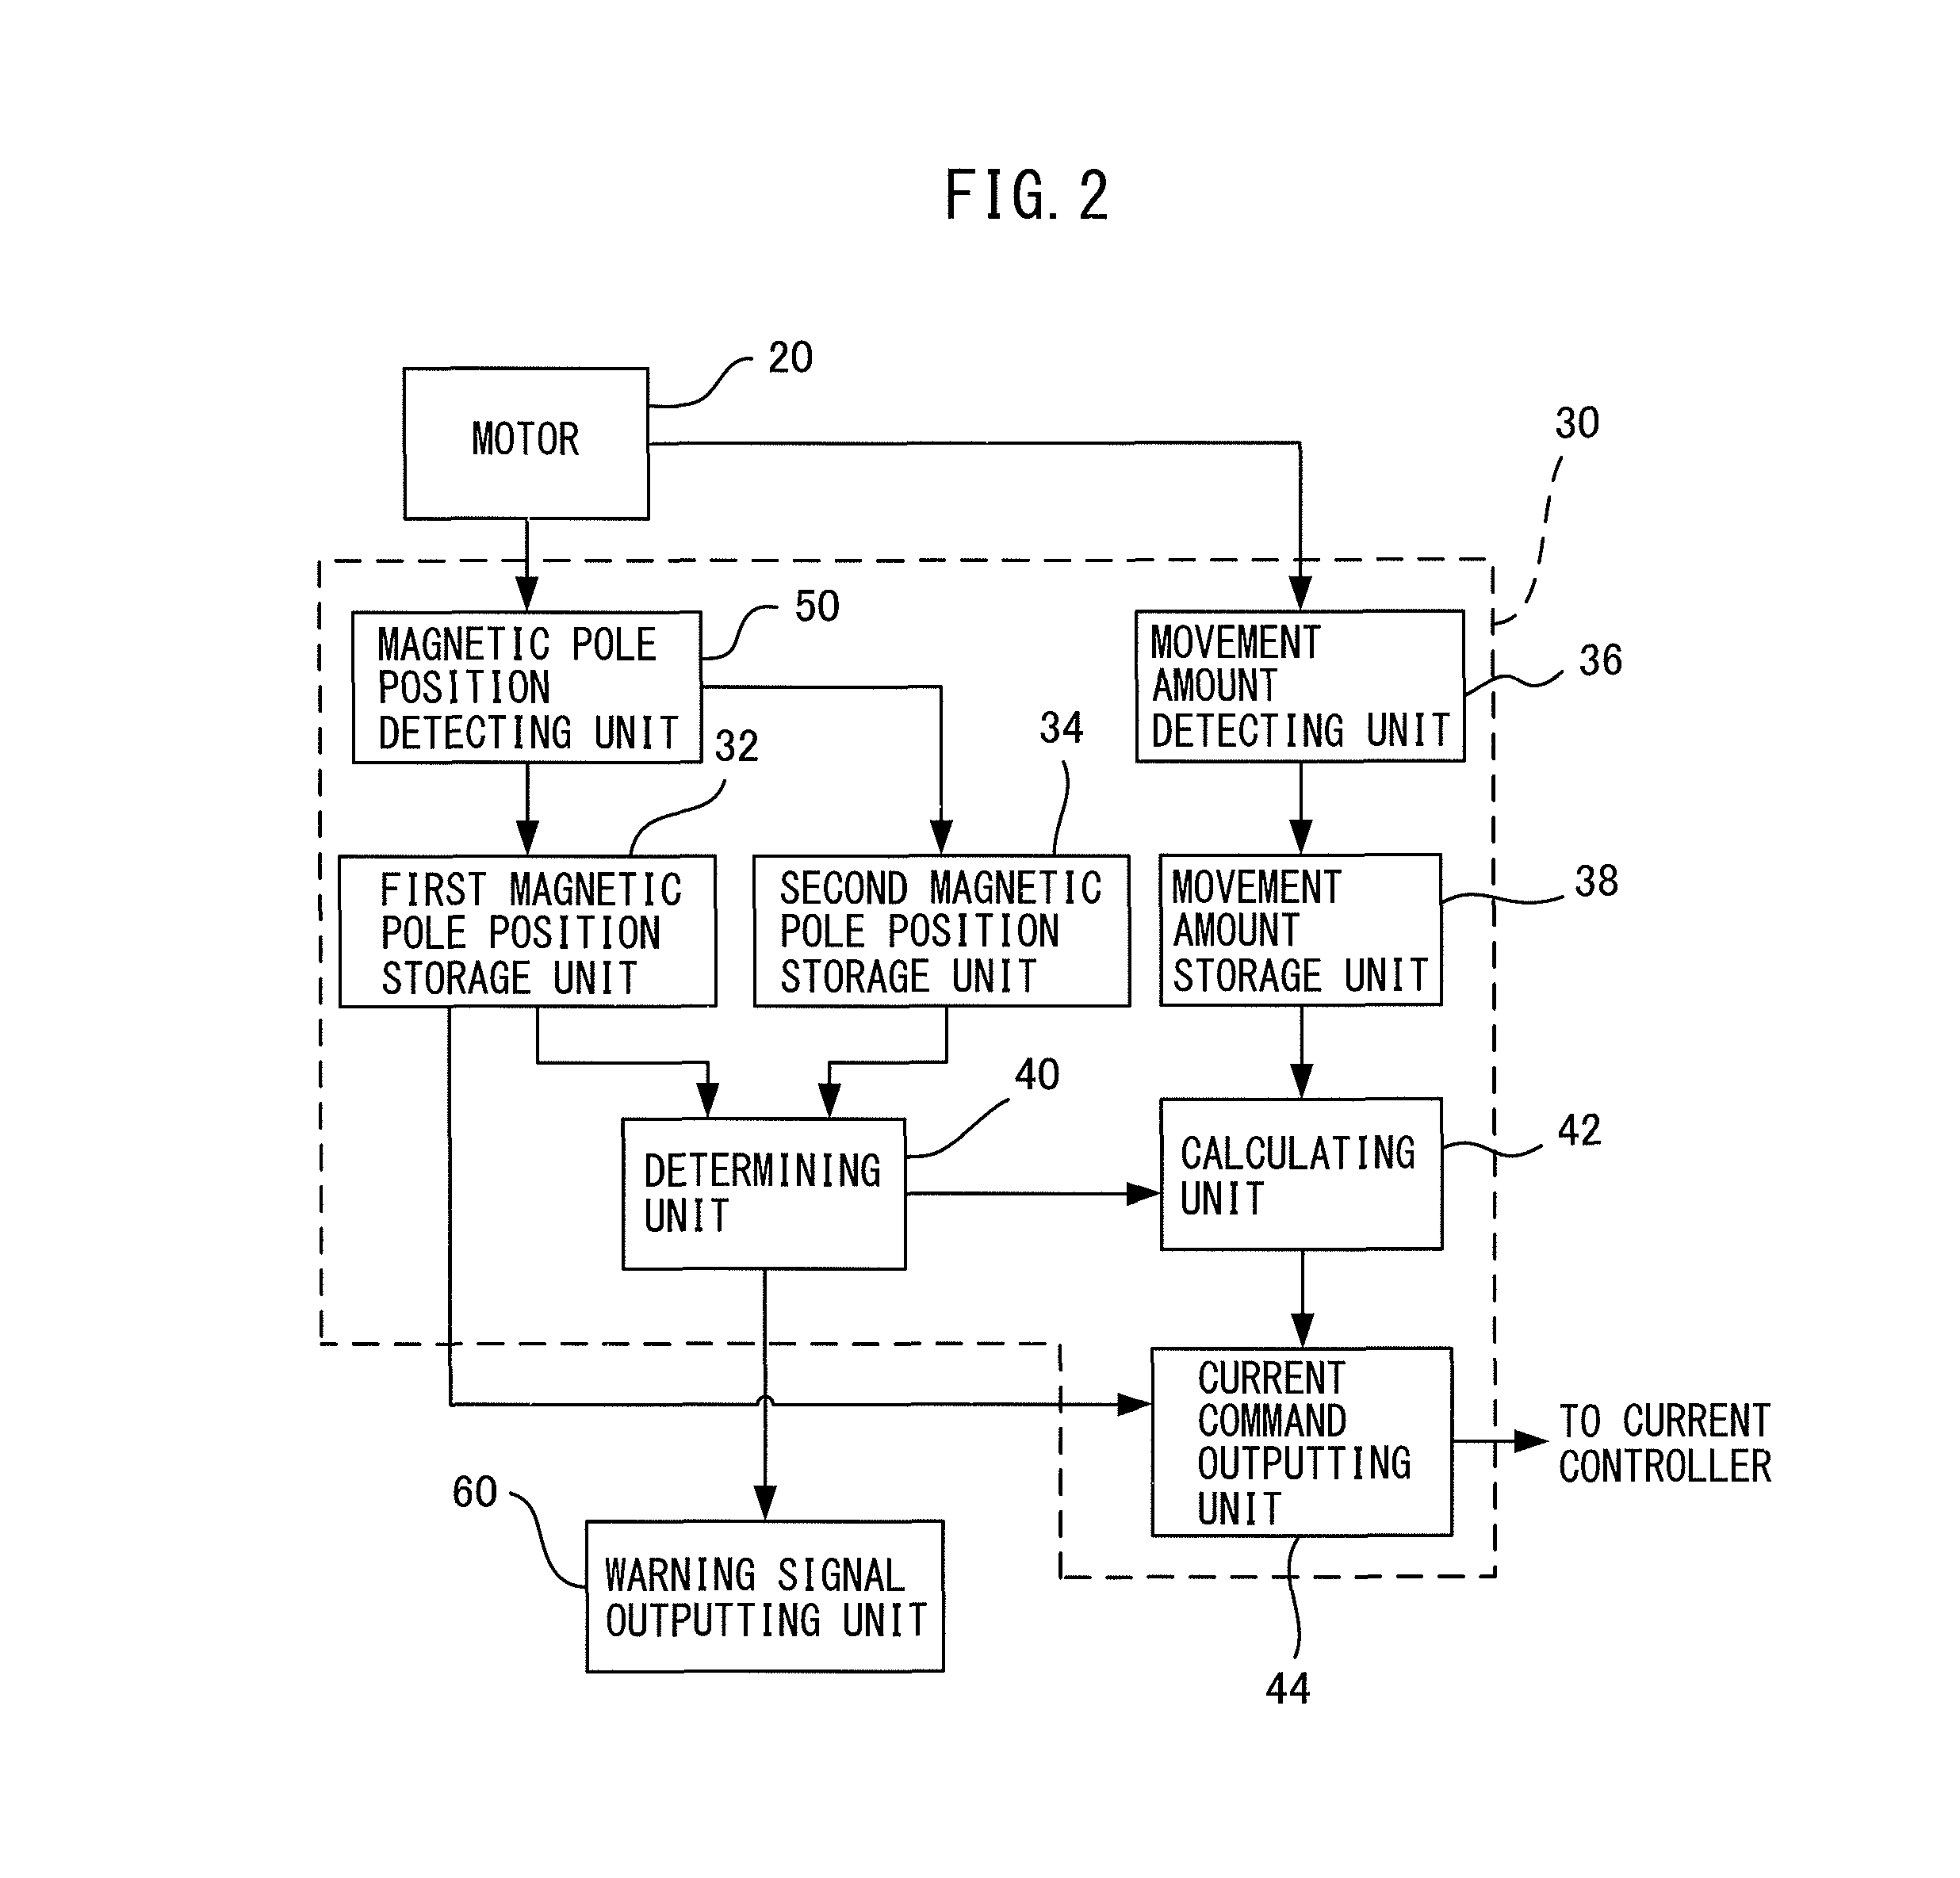 Magnetic pole position detecting device for detecting magnetic pole position of rotor in permanent-magnet synchronous motor